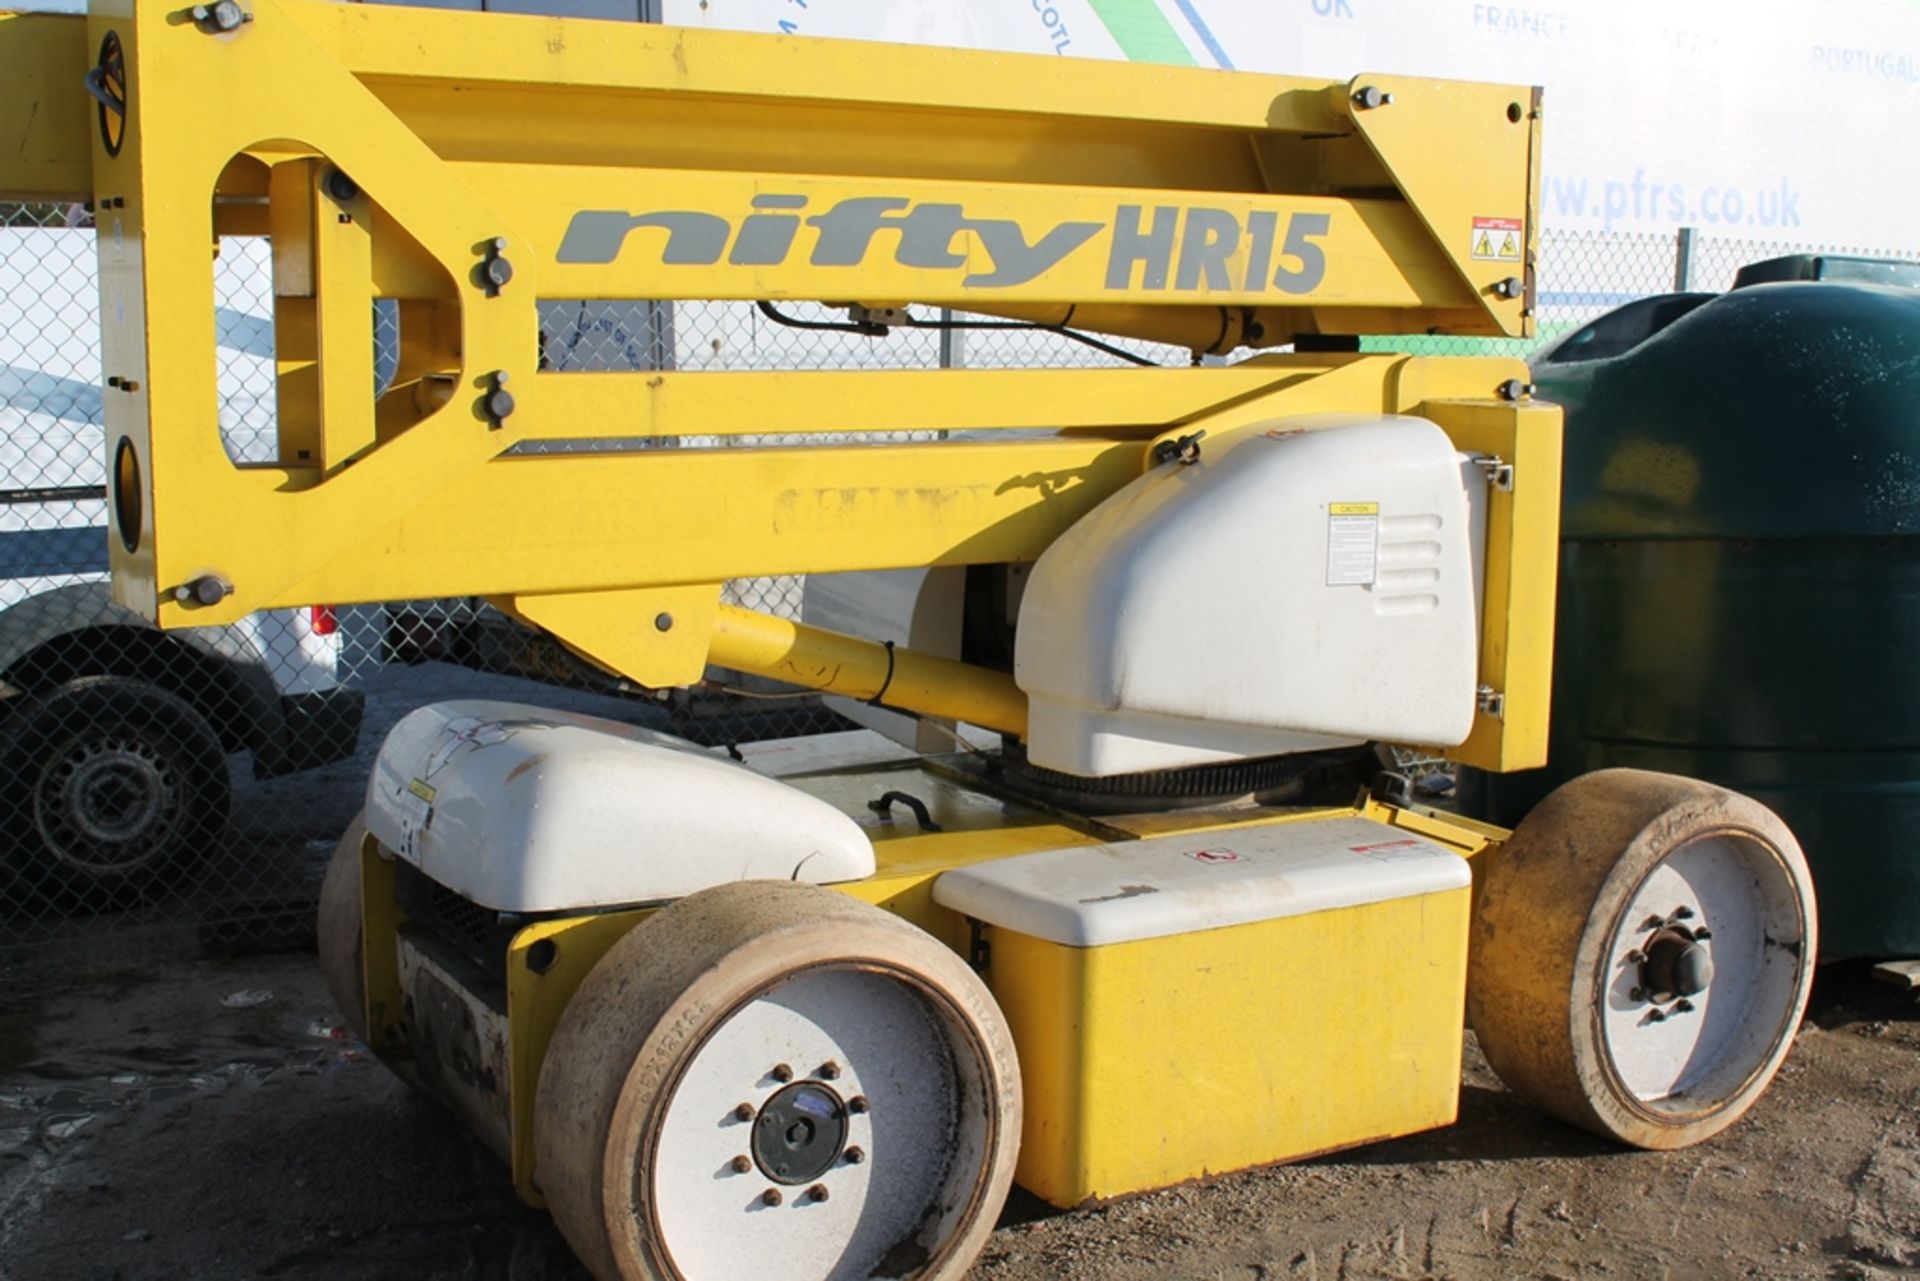 NIFTY HR15 CHERRY PICKER - Image 4 of 6